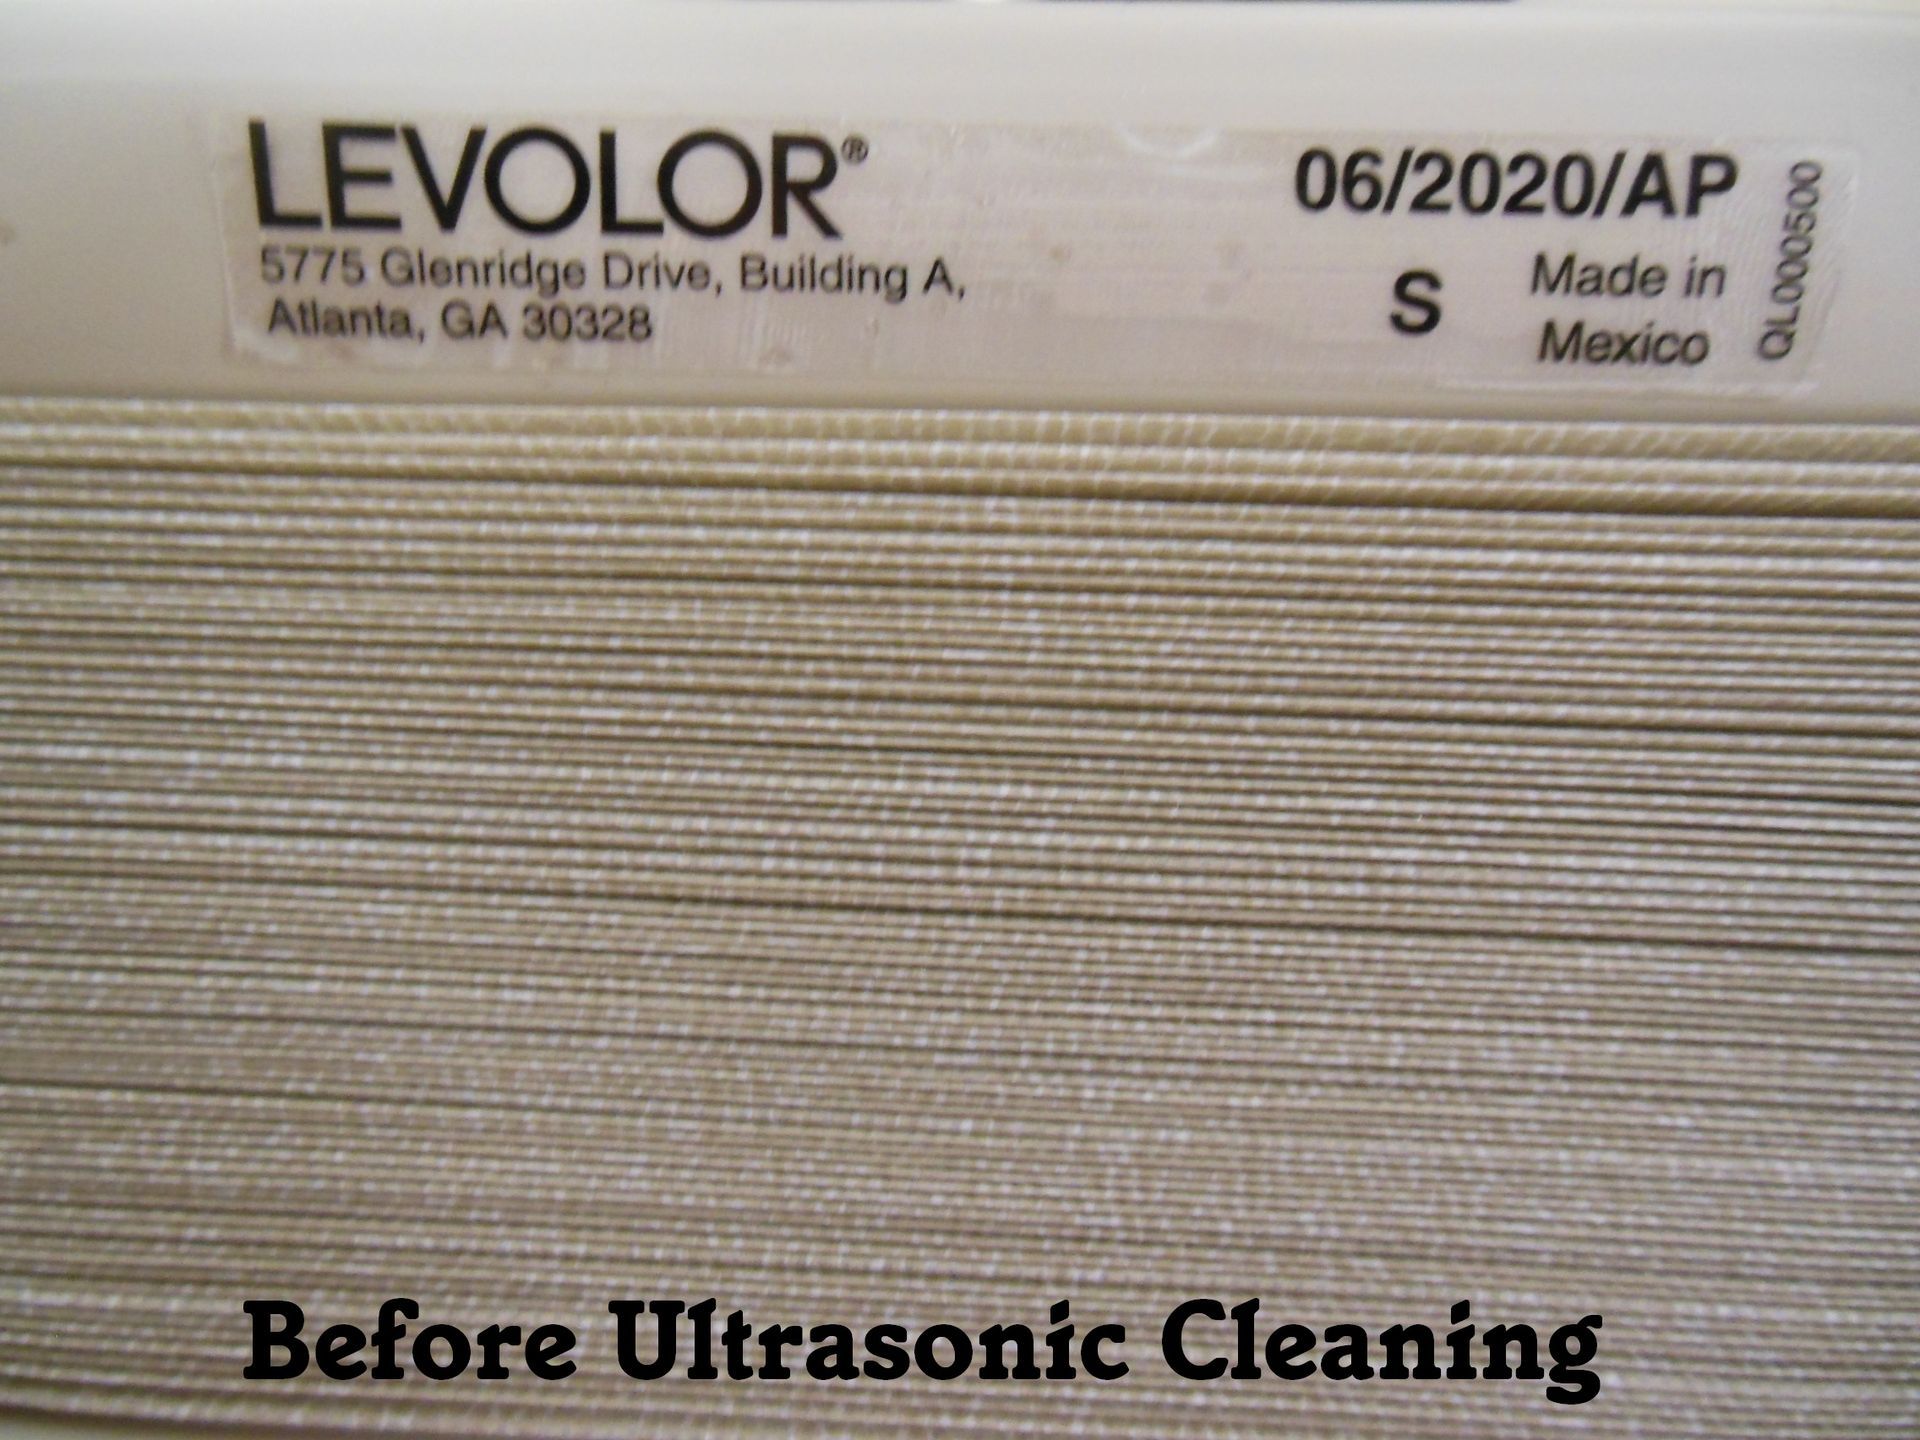 Before Ultrasonic Cleaning